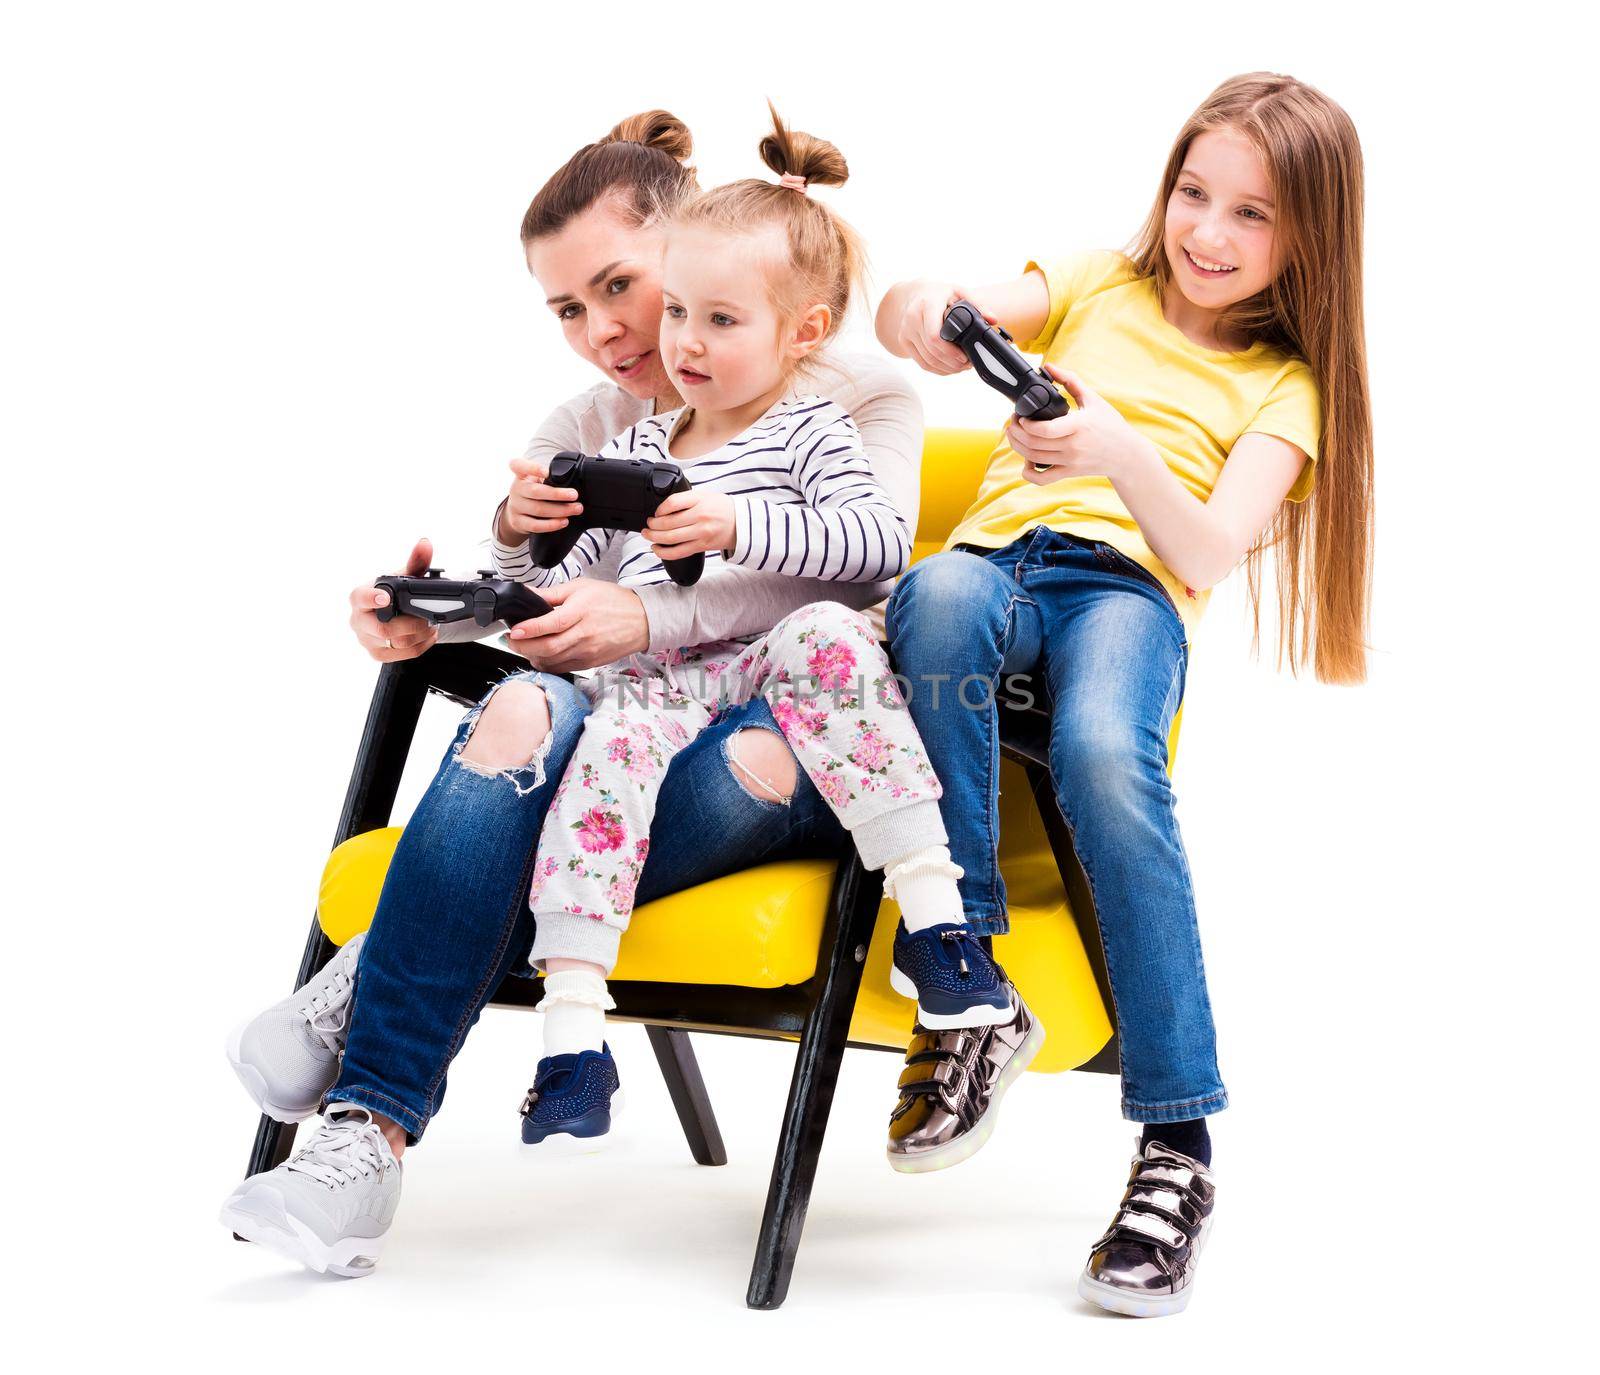 Mom and daughters spending time on computer games on playing console, using joystick